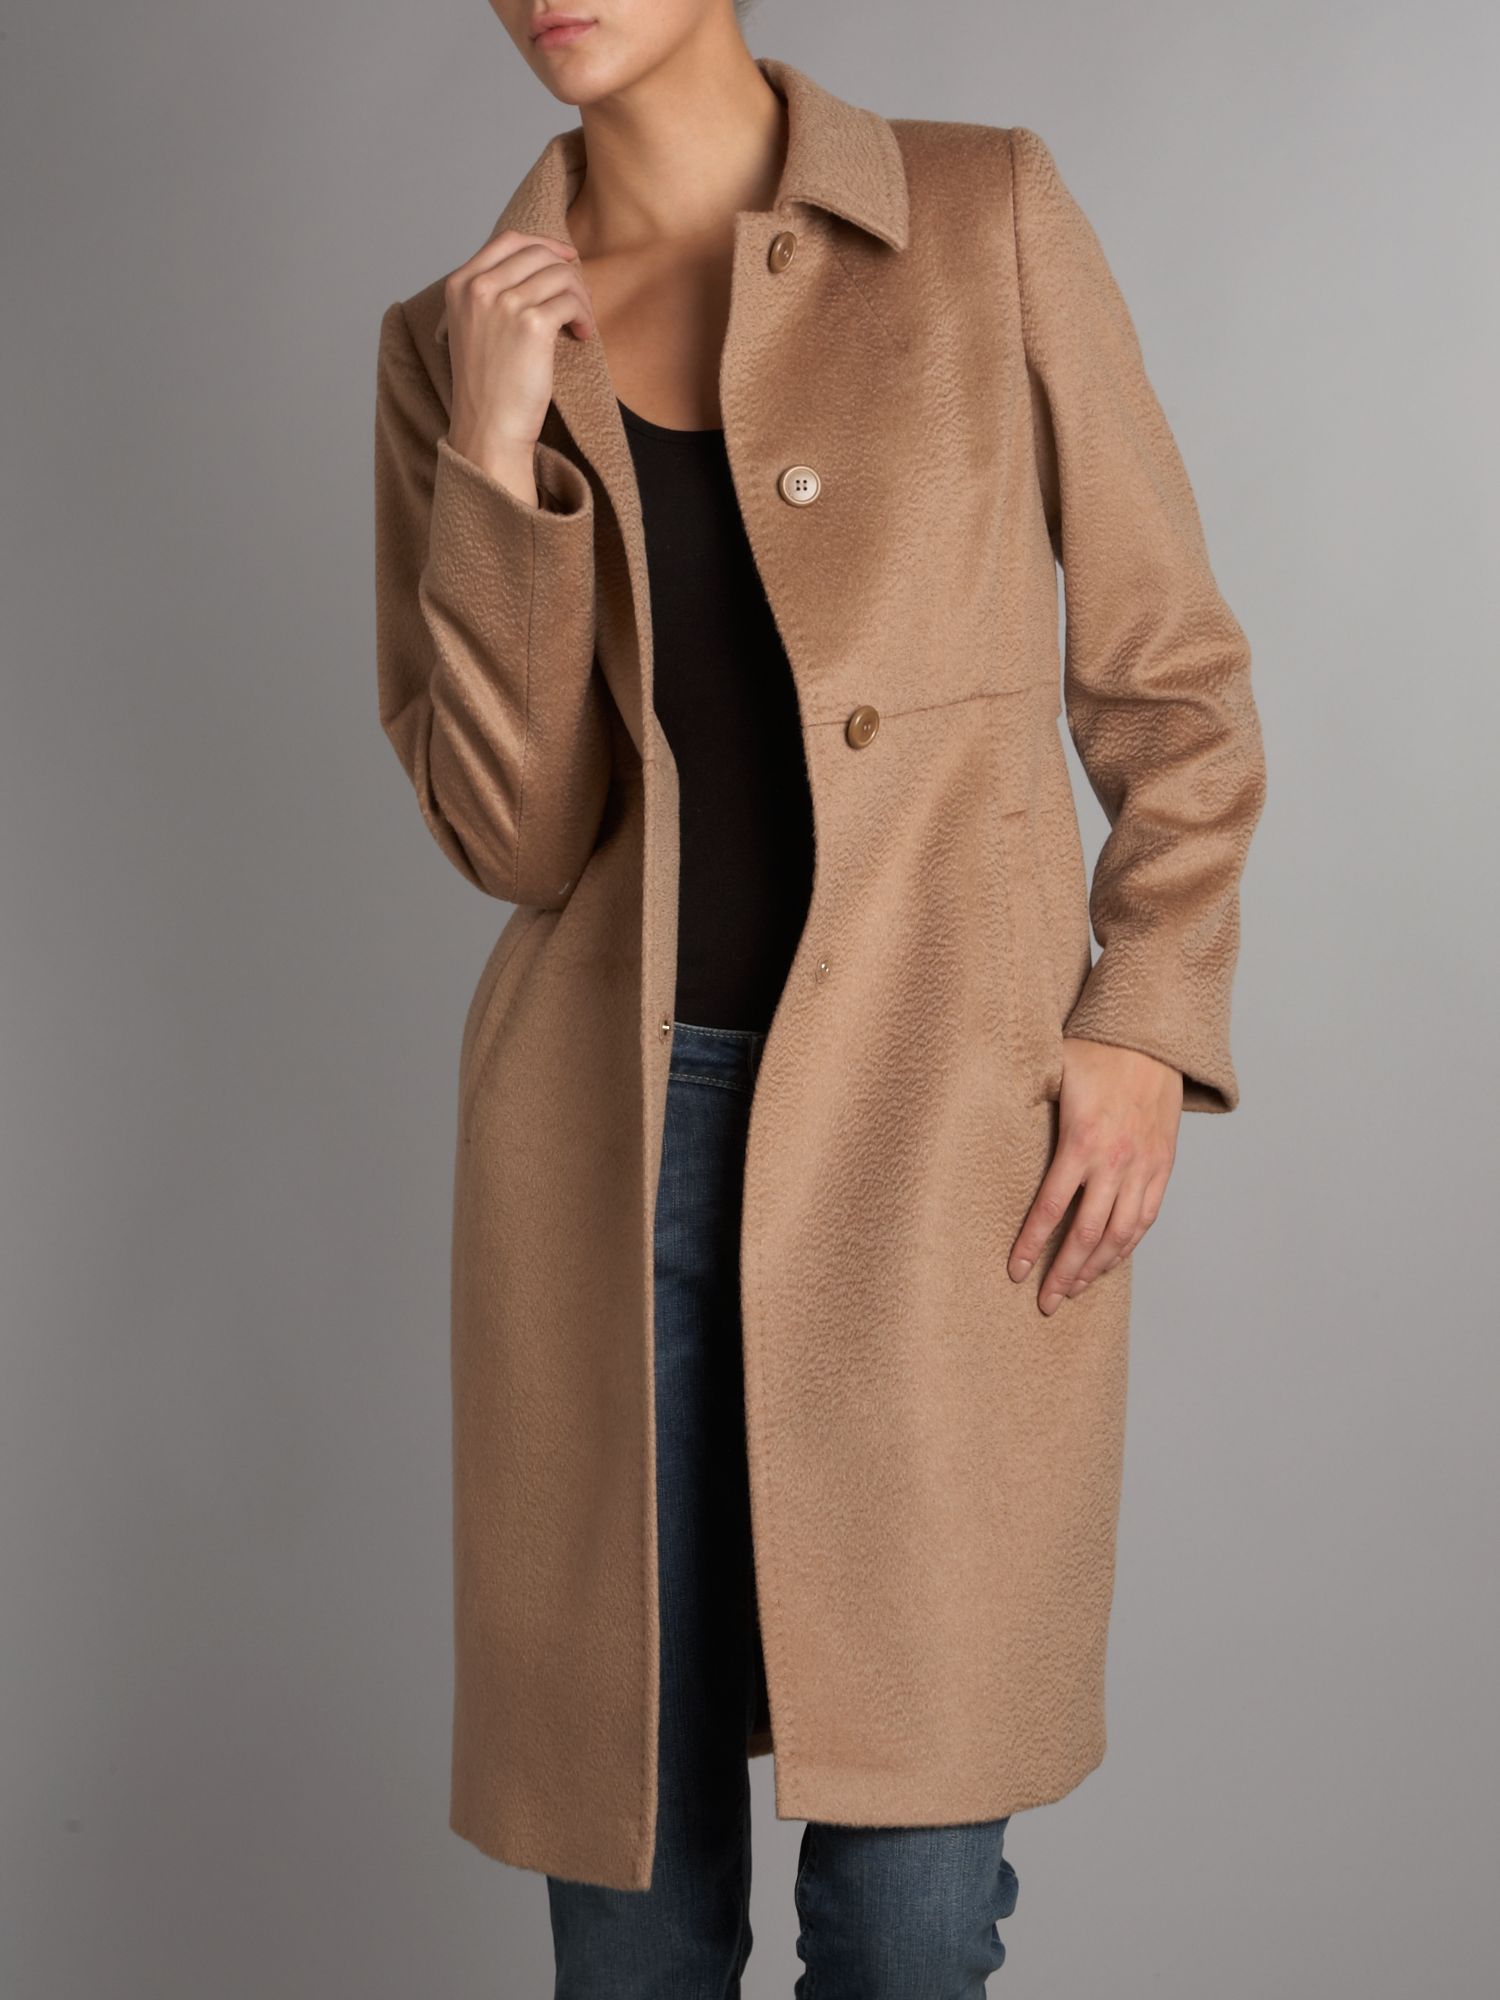 Max mara studio Cashmere and Wool Wrap Coat in Natural | Lyst